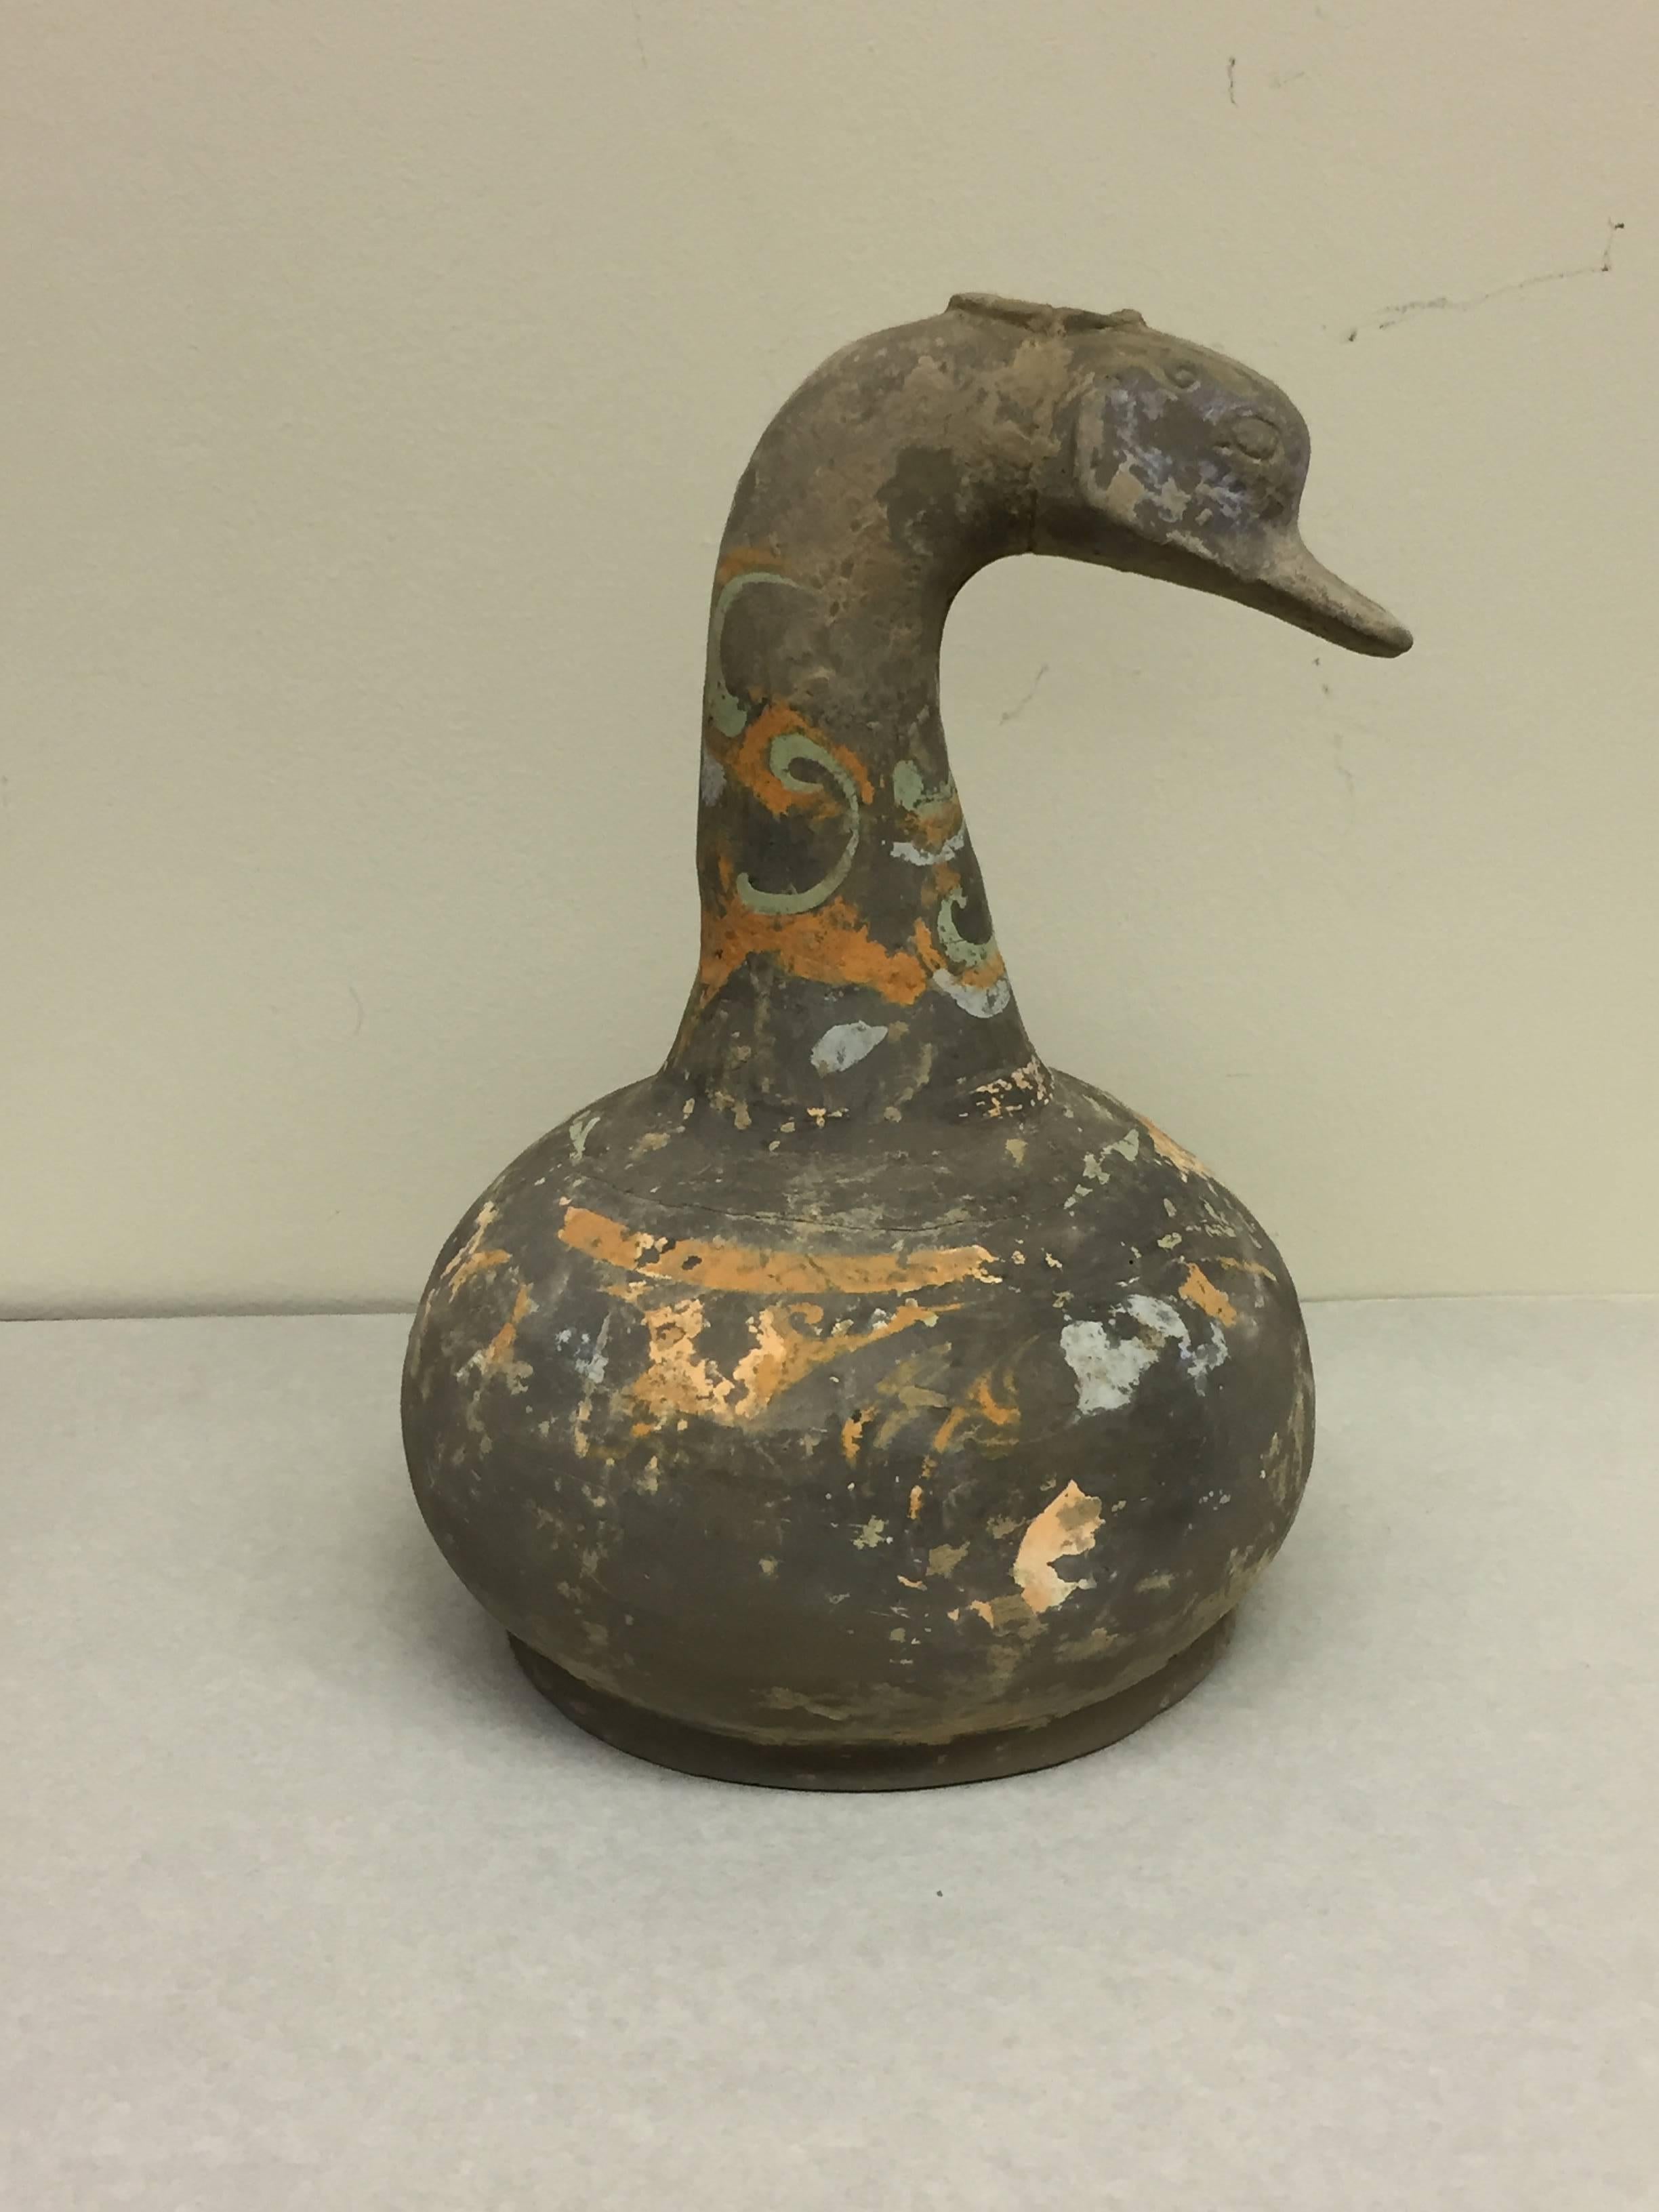 Offered by J R Richards
An ancient pottery vessel with duck shaped head and beak.
From the Han dynasty (206 BC-220 AD), with pigments.
Measures: 12.5" tall x 9.5" wide.